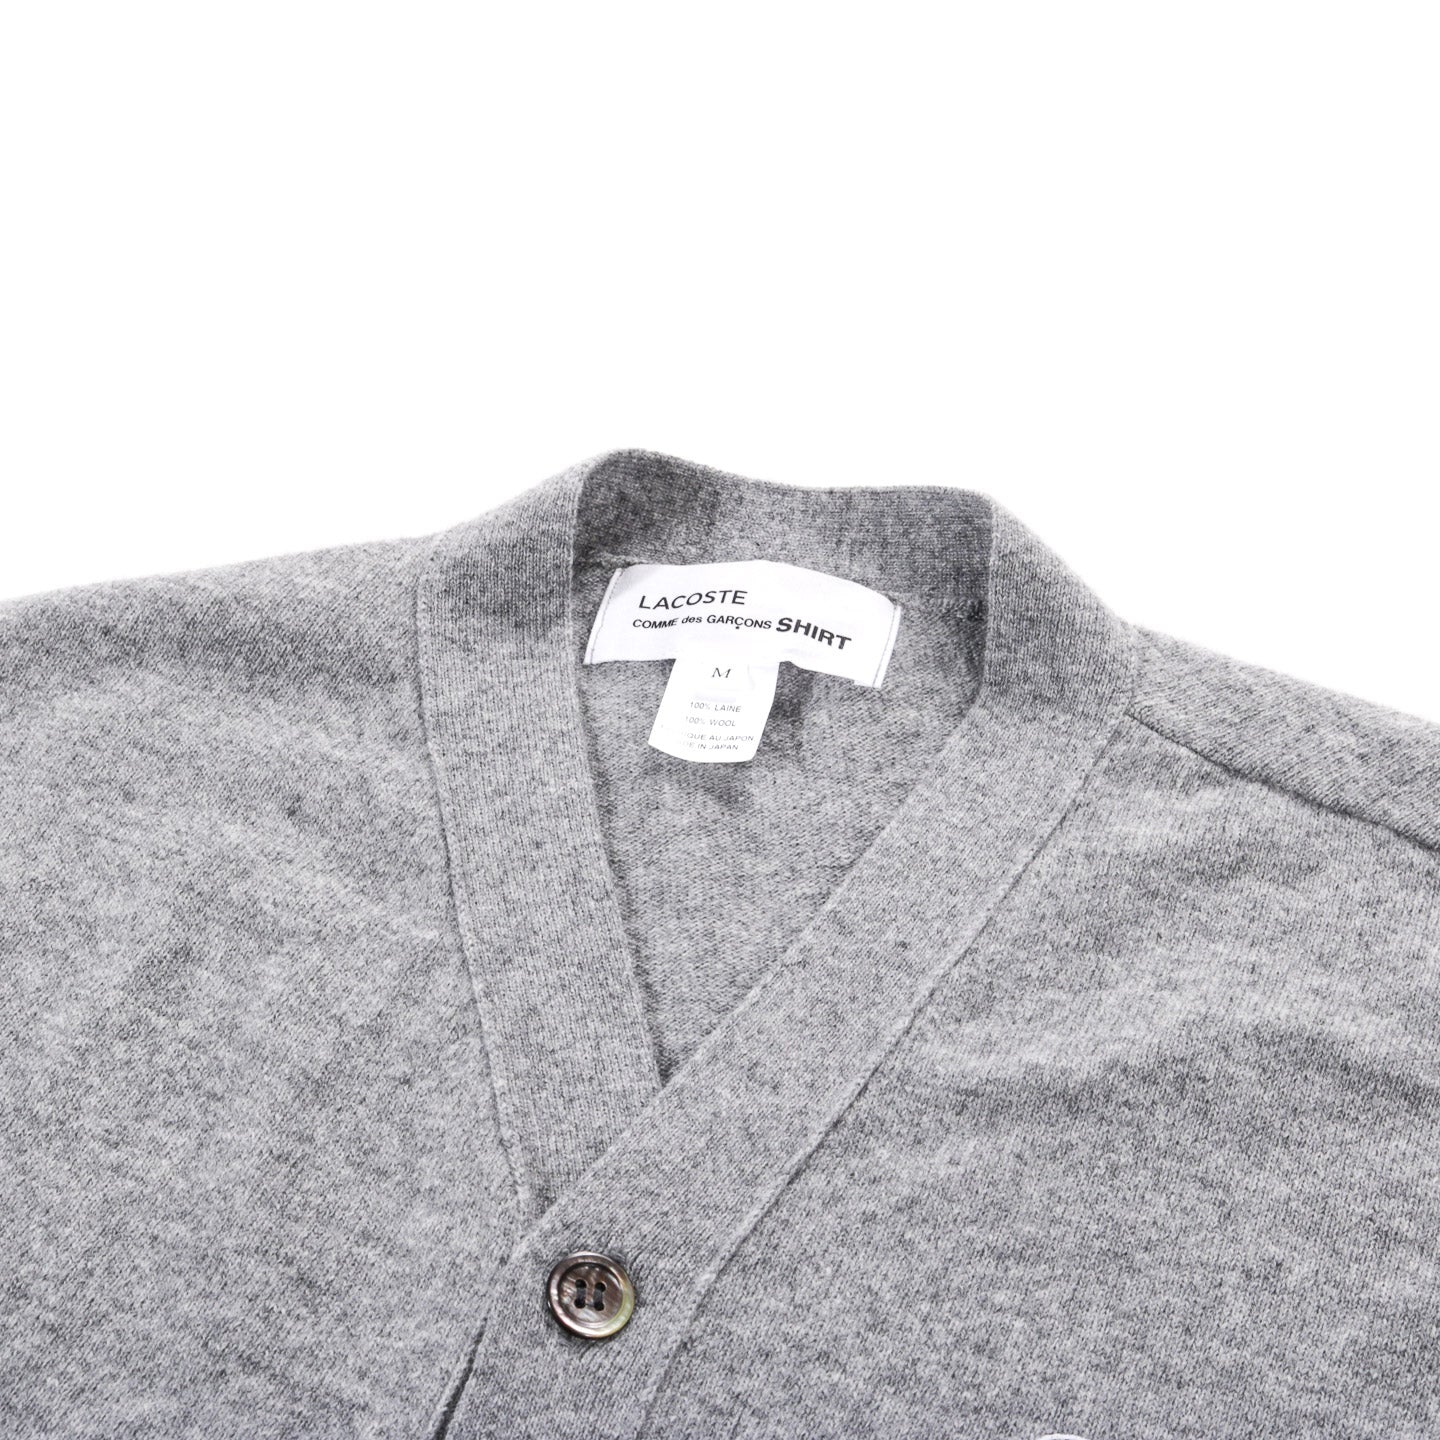 COMME DES GARCONS SHIRT N005 LACOSTE TWISTED CARDIGAN GREY